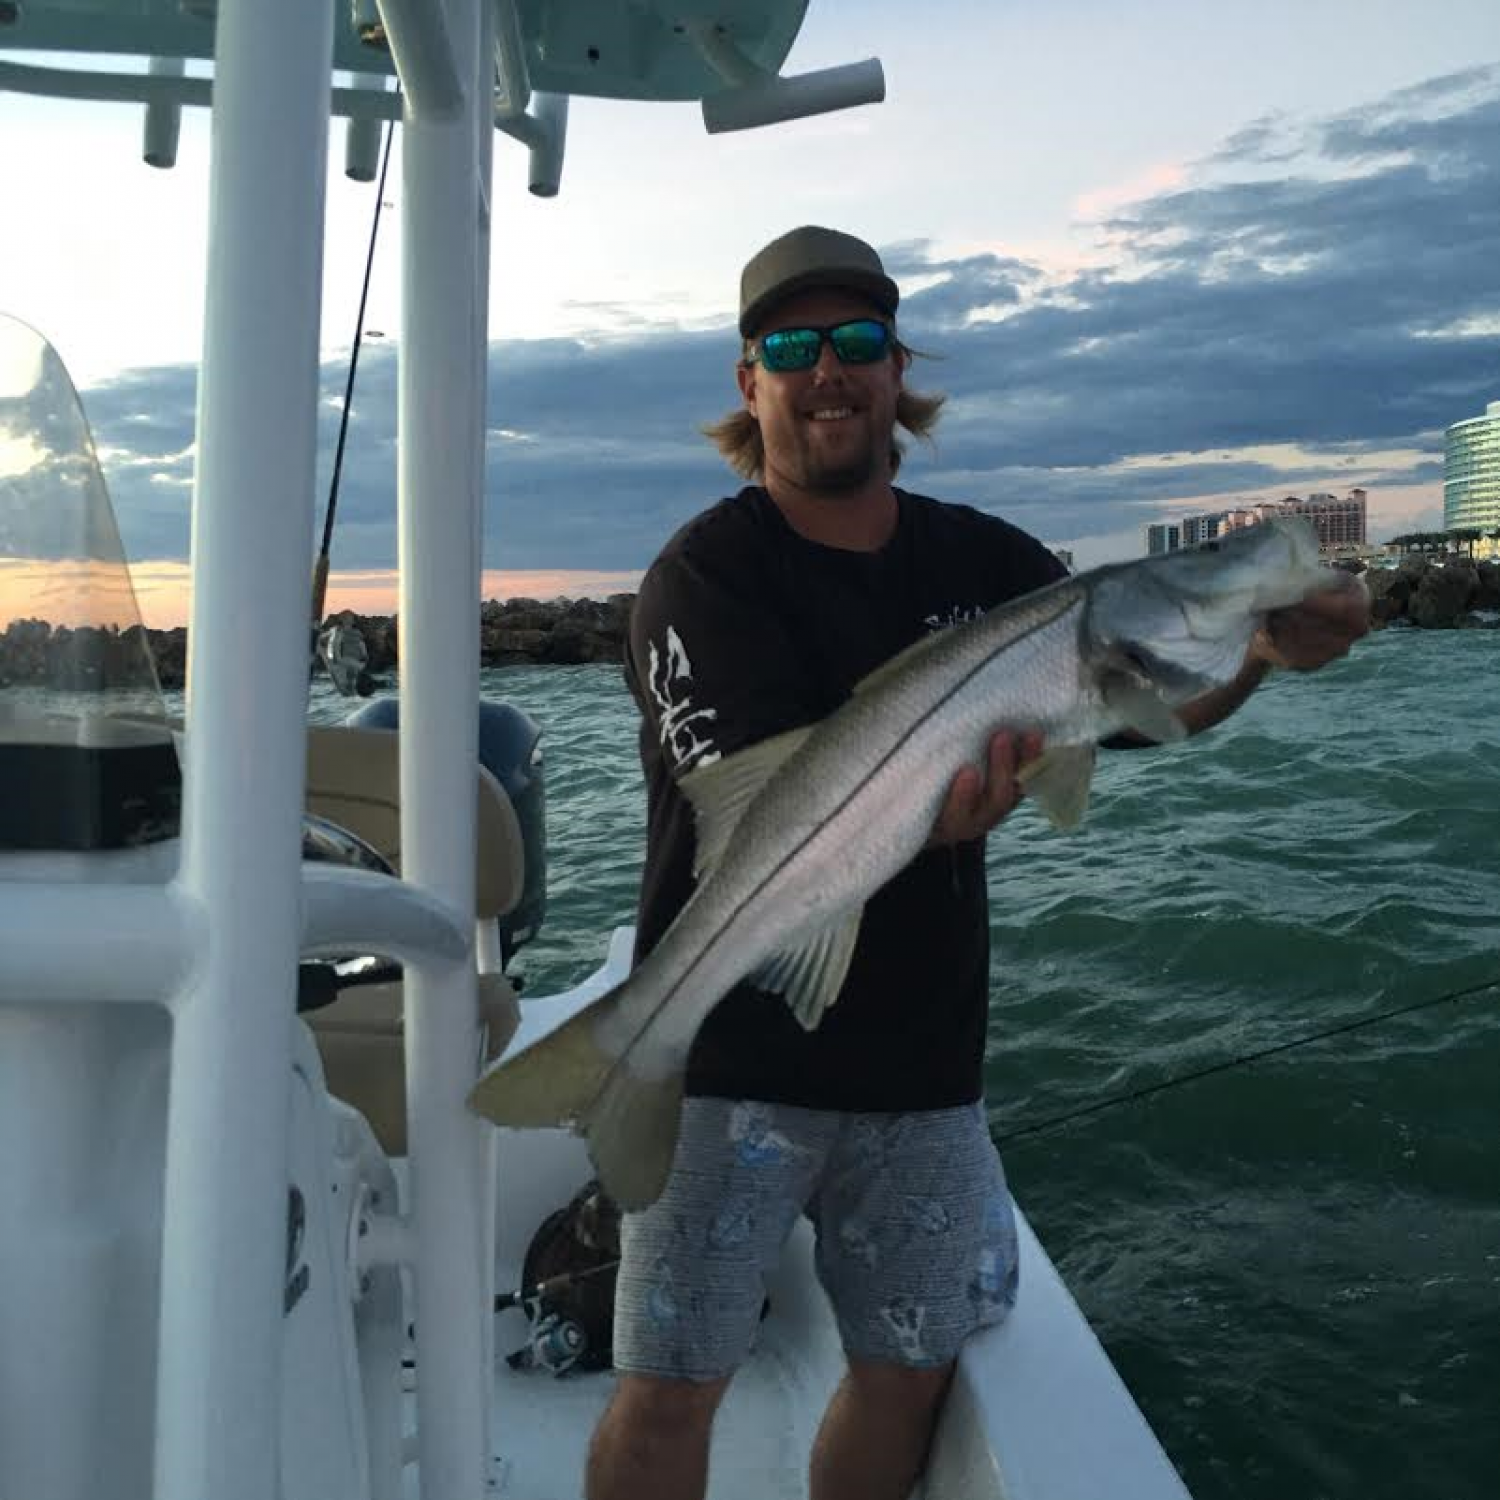 Snook fishing the passes or running offshore. The Sportsman 247 masters gets the job done!  Her...